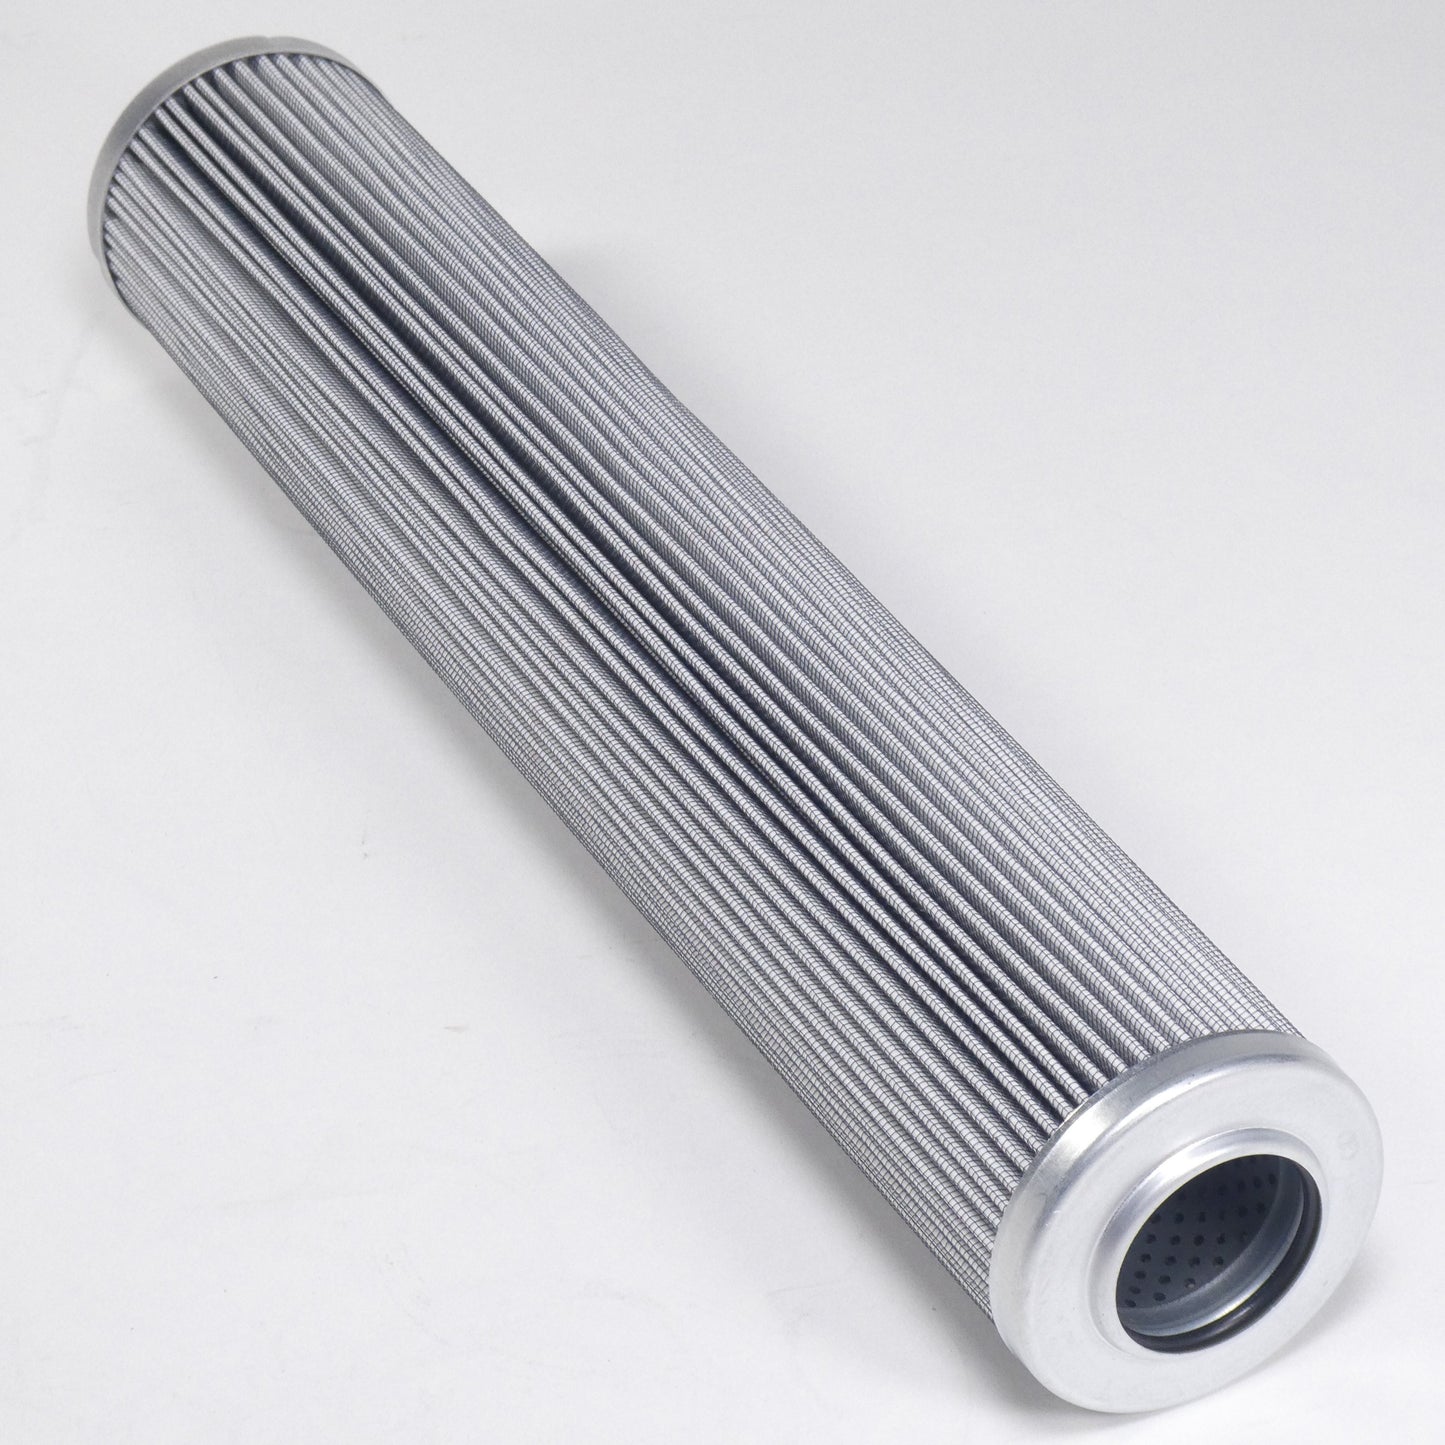 Hydrafil Replacement Filter Element for Filtersoft H9616MFBL